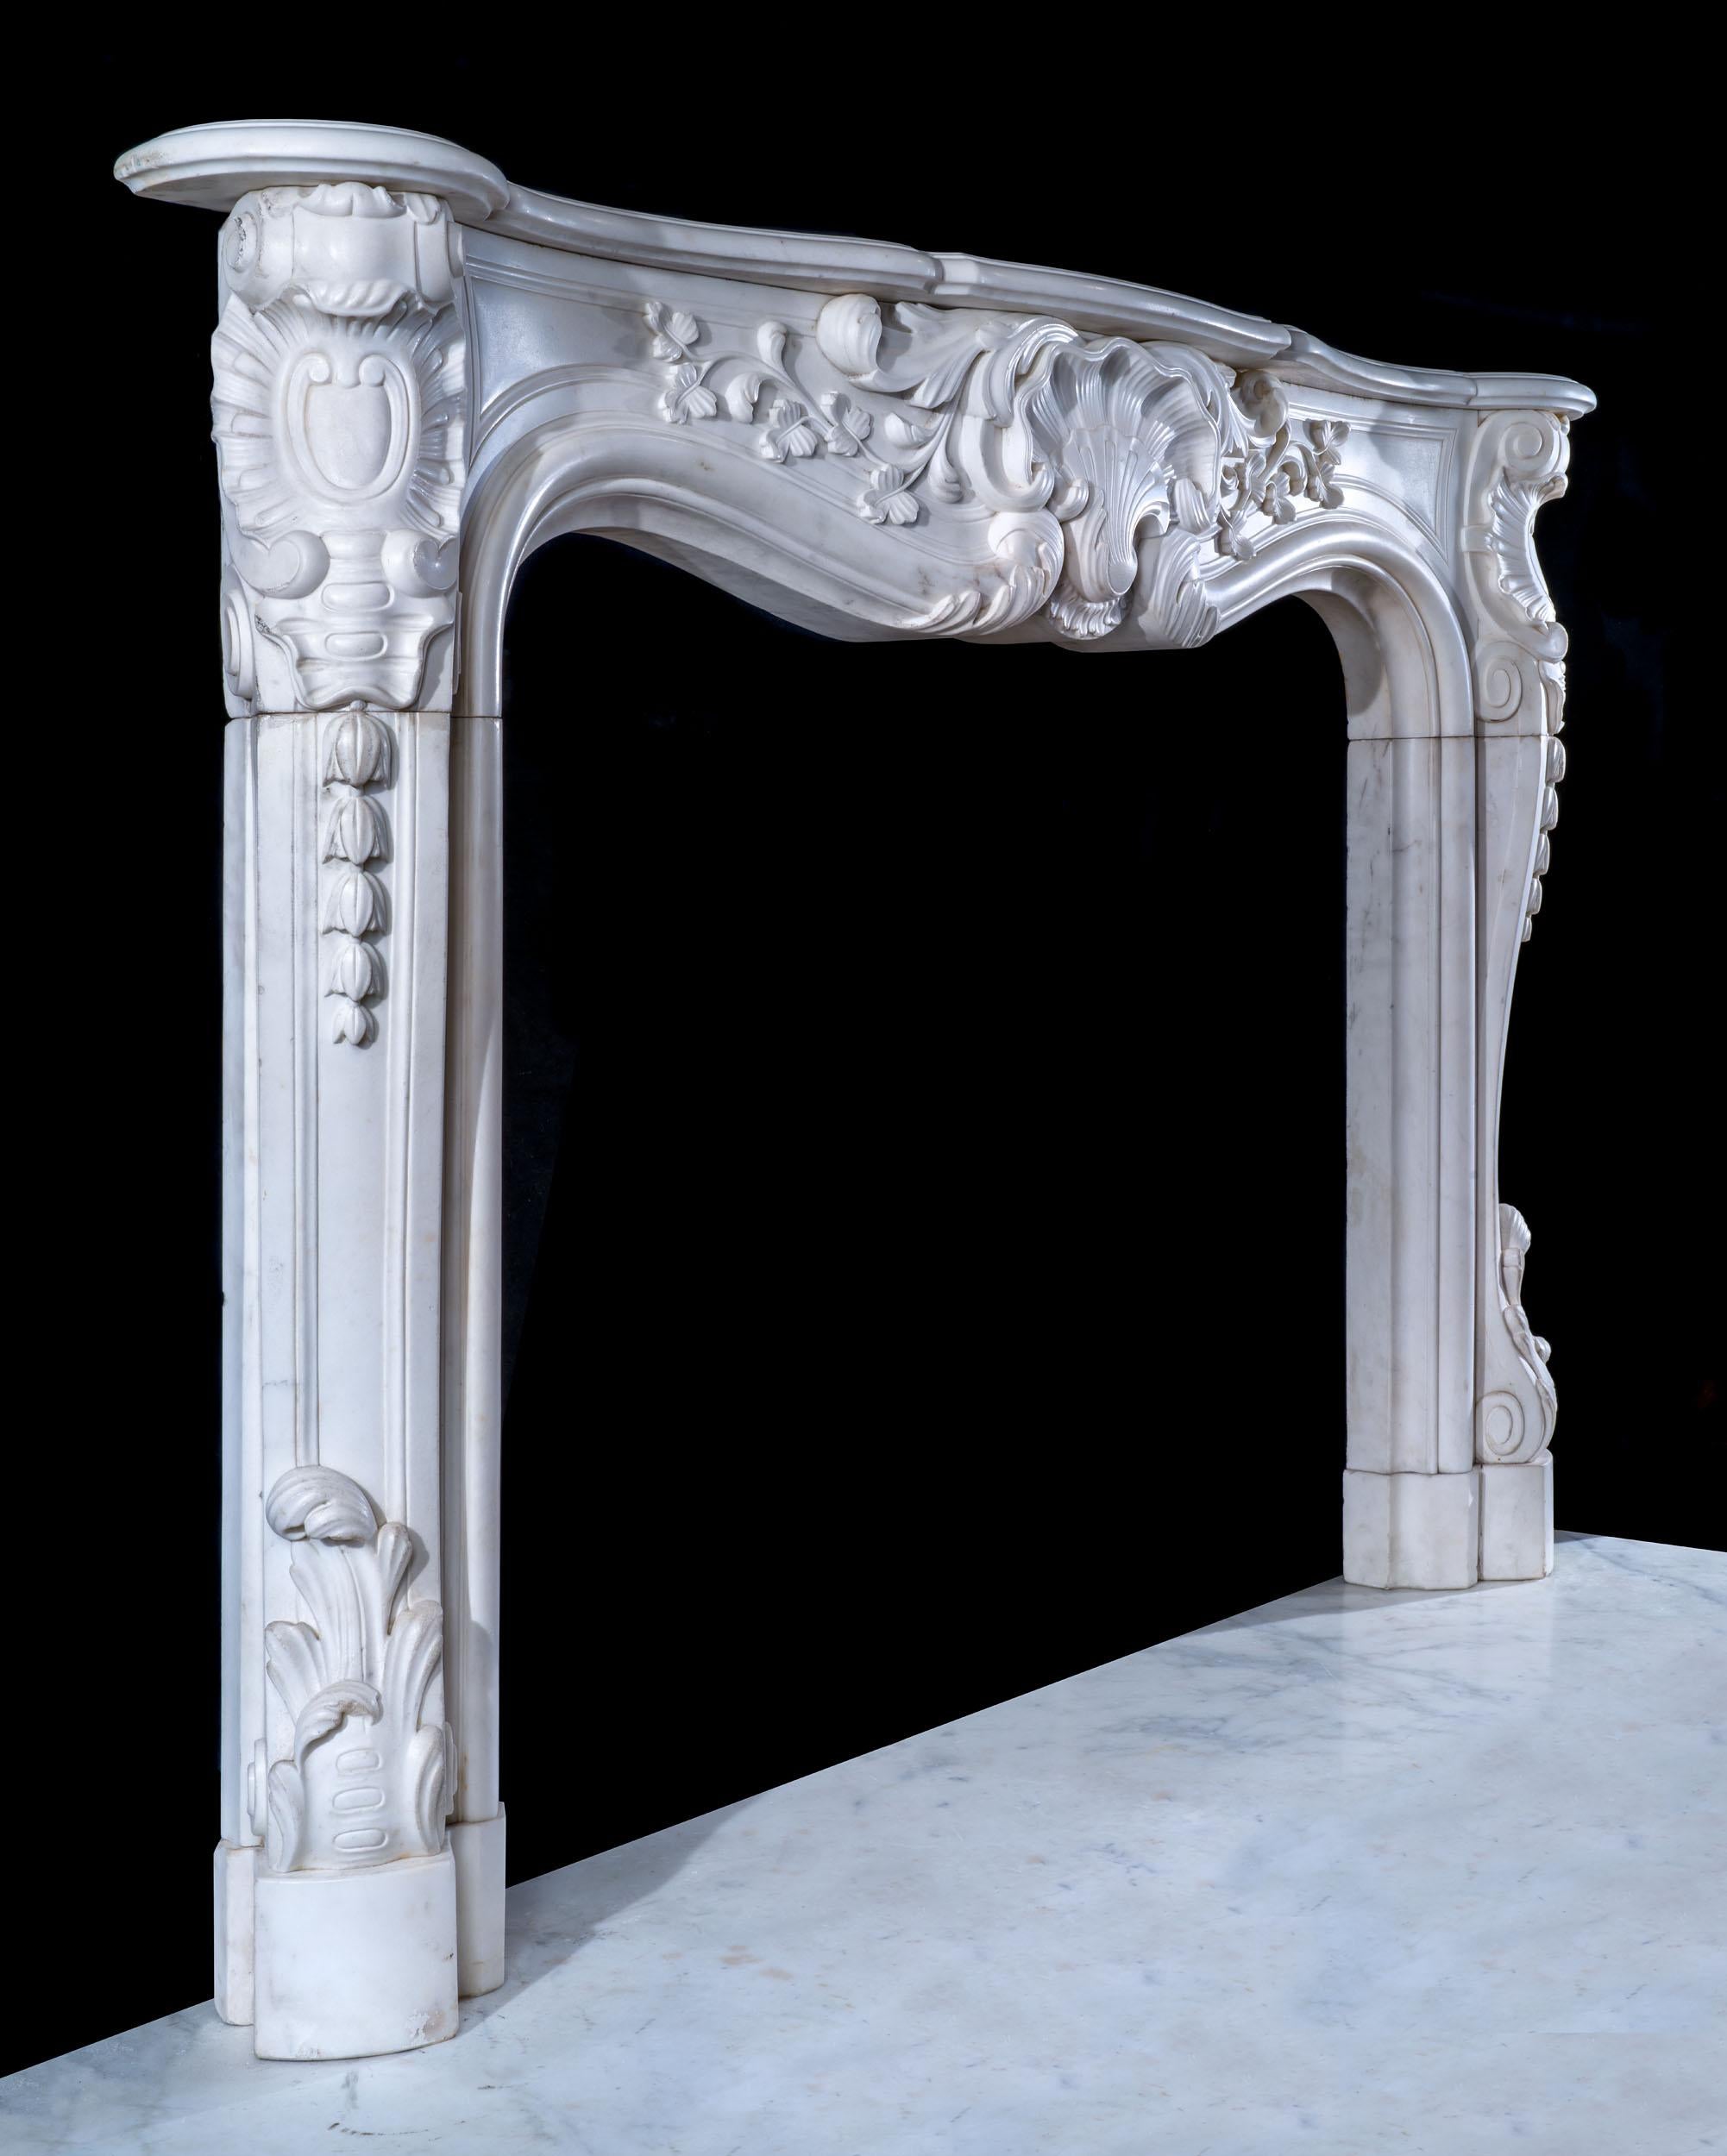 A fine Scottish Rococo statuary marble chimneypiece. The moulded serpentine shelf rests above a dramatic panelled frieze, centred by a rocailled motif, and scrolling foliate decoration. This is echoed by the beautifully carved c scroll enblocks,